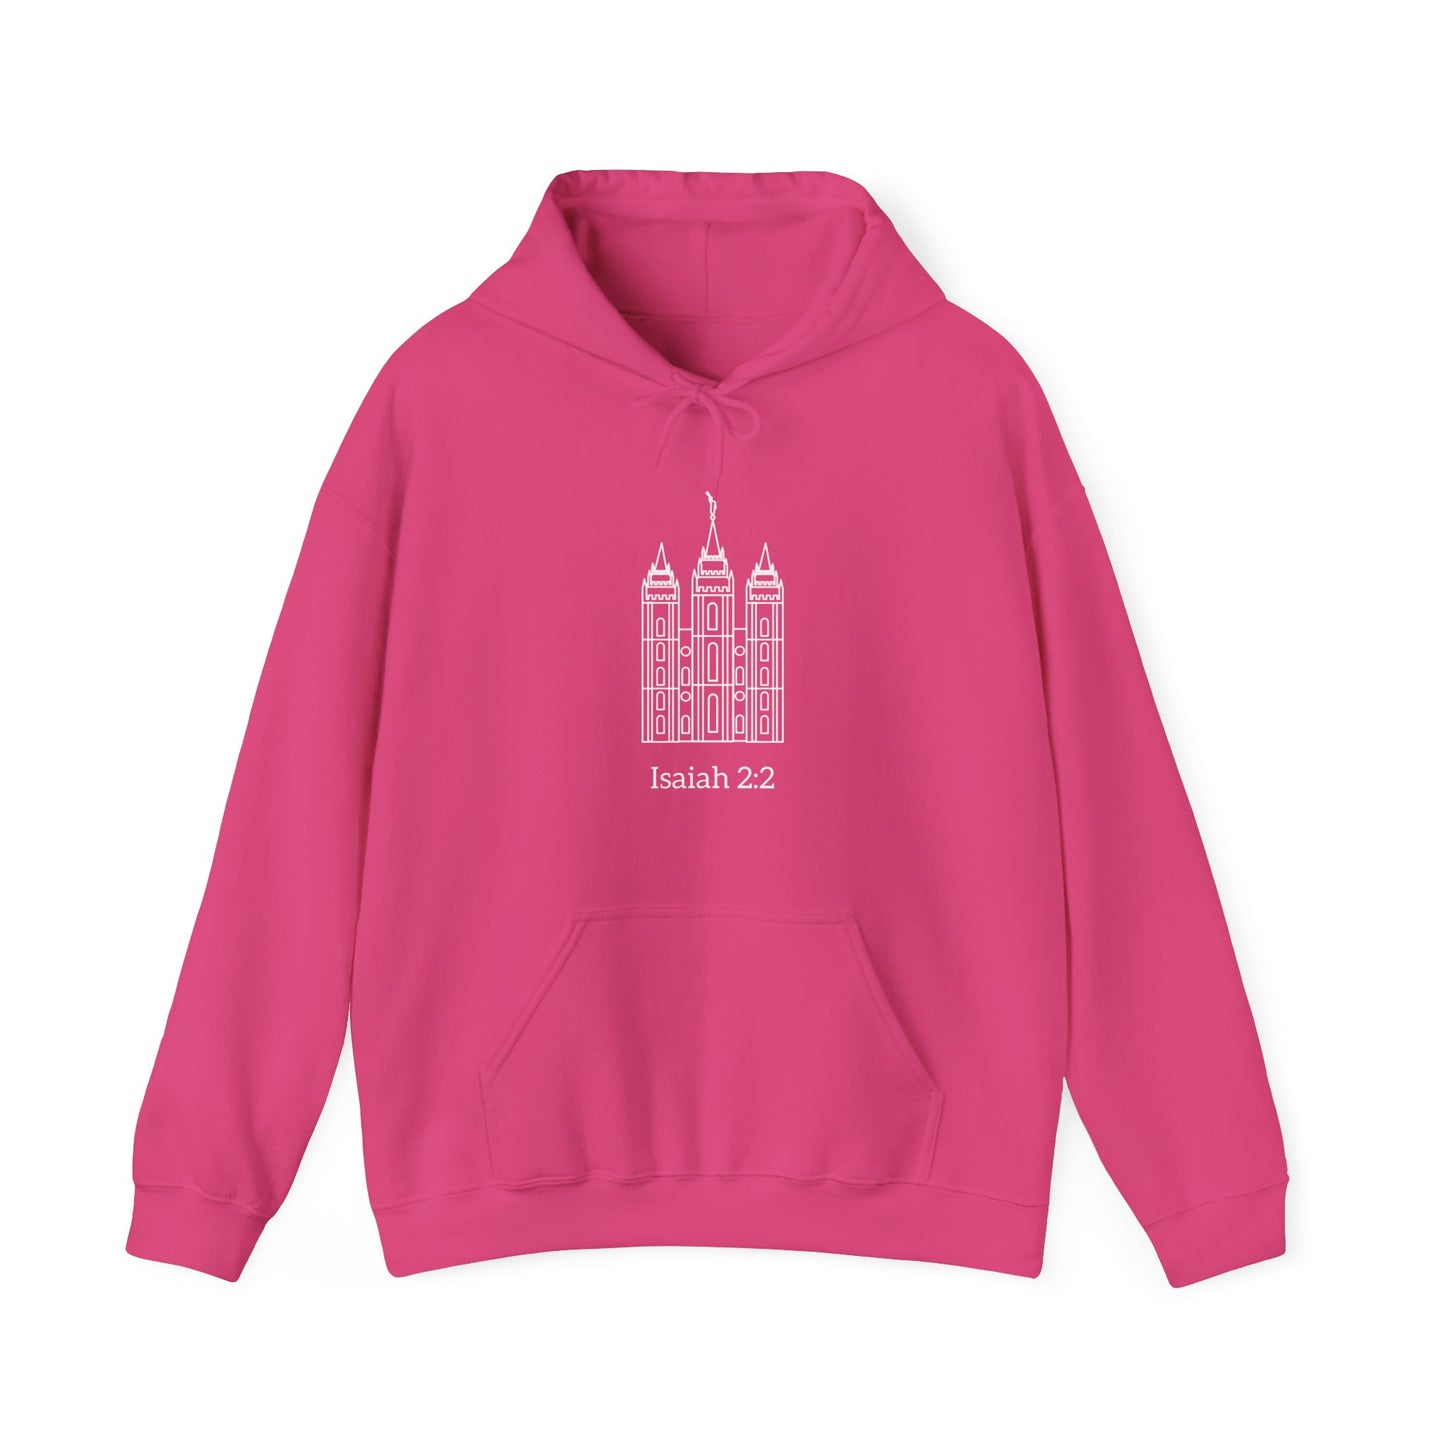 Mountain of the Lord's House Hoodie